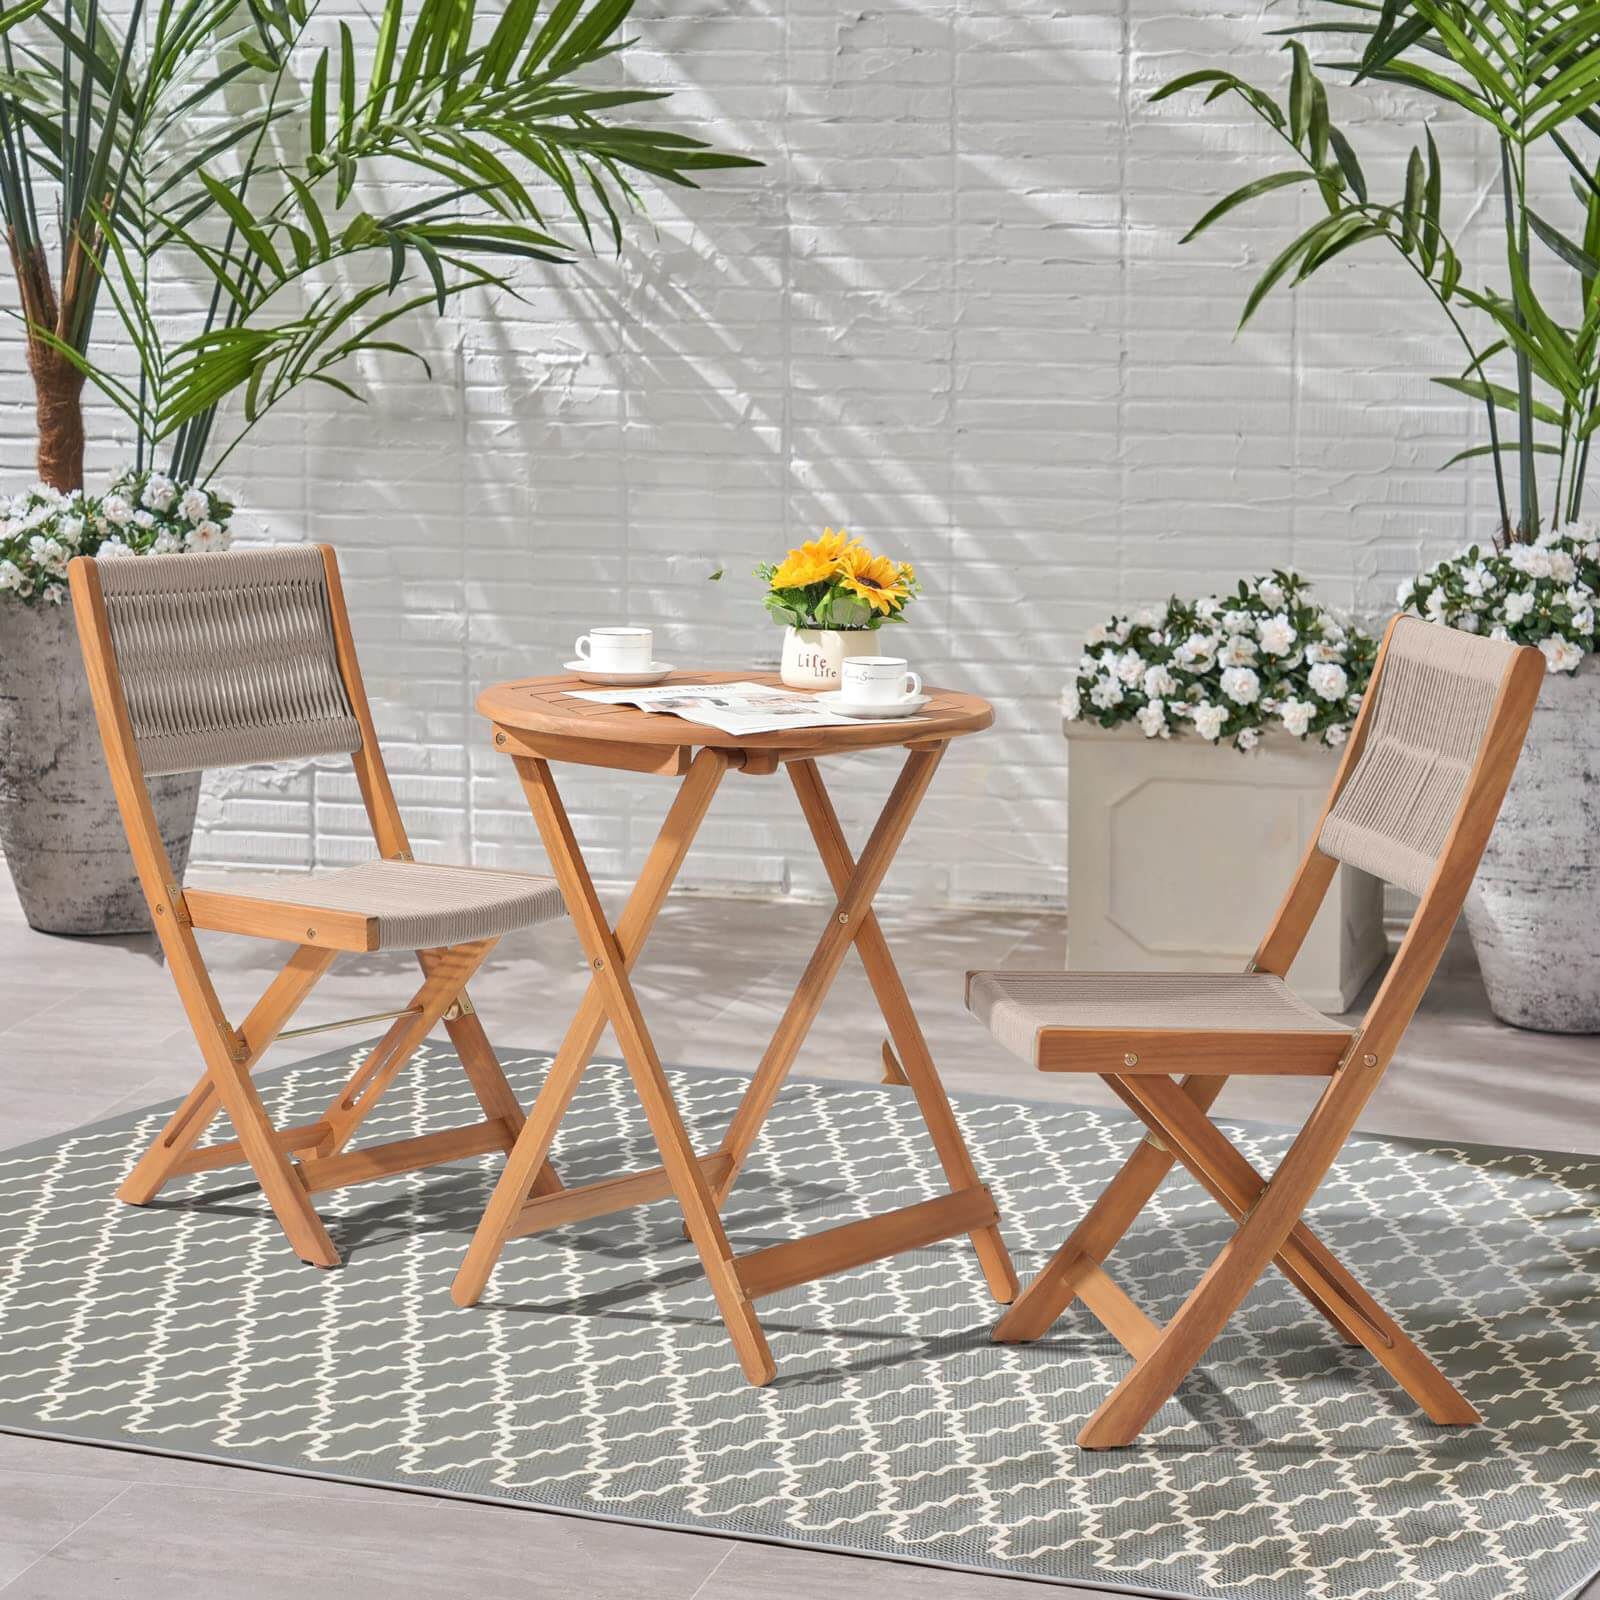 3 Piece Patio Bistro Set, Outdoor Compact Wood Table and Chairs Set of 2 